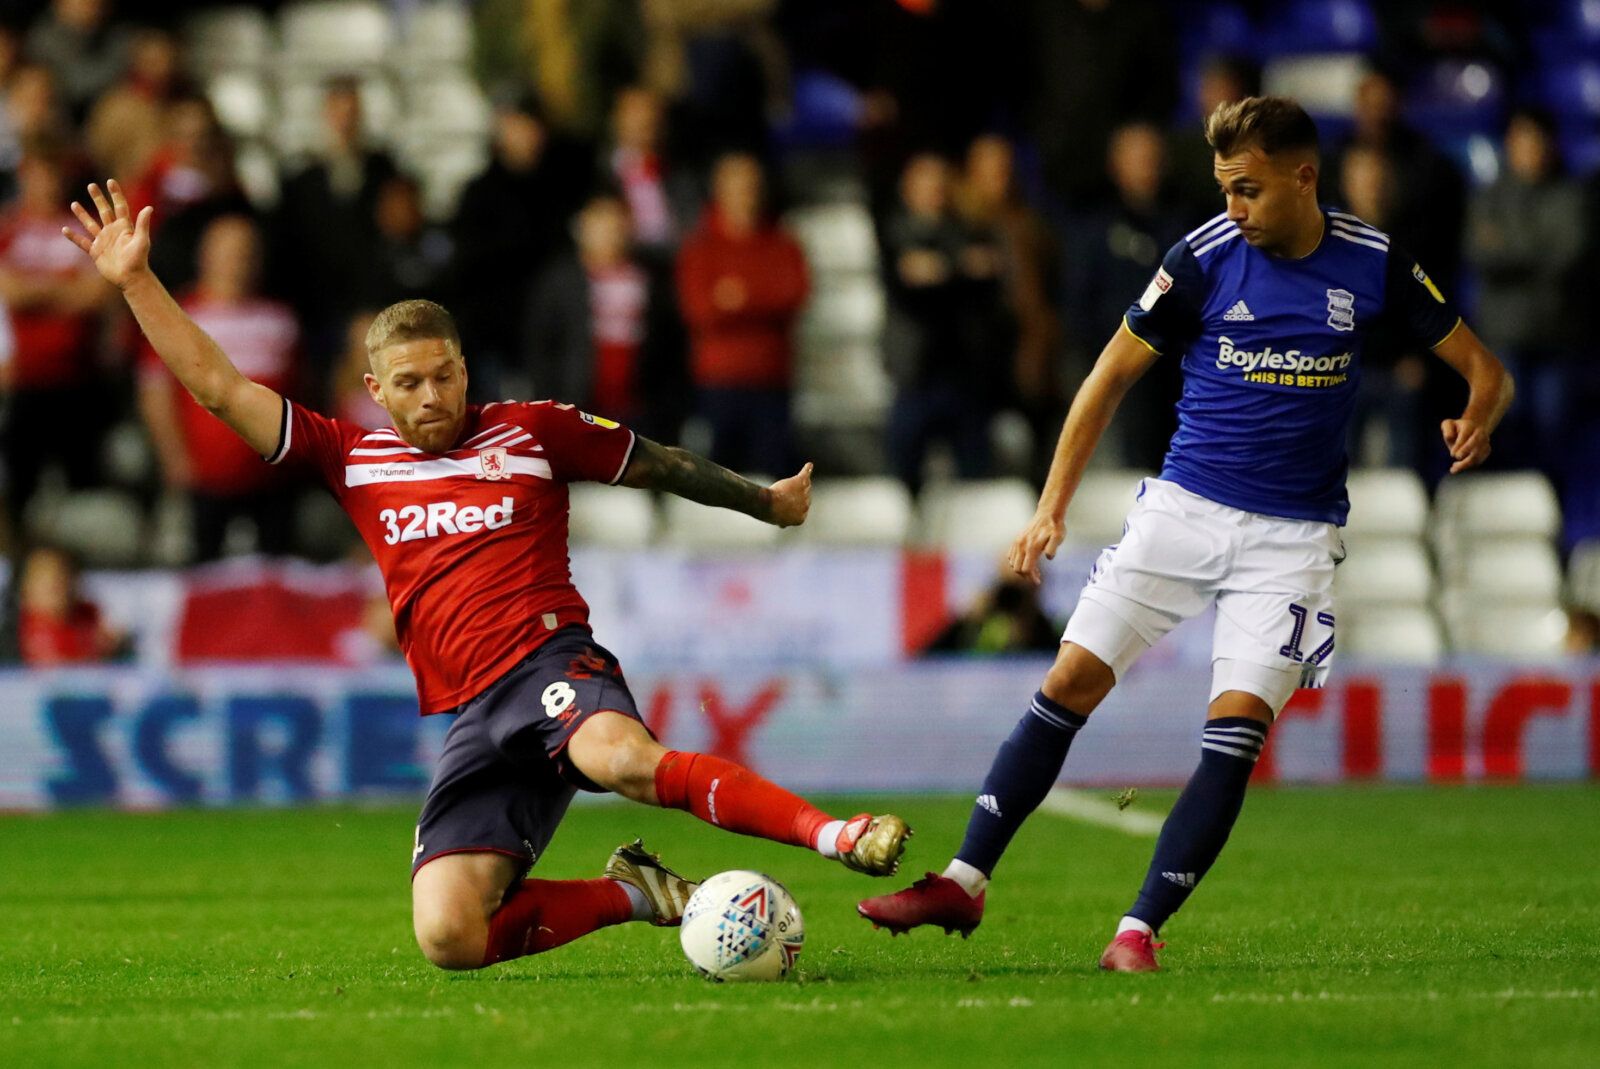 Soccer Football - Championship - Birmingham City v Middlesbrough - St Andrew's, Birmingham, Britain -October 4, 2019   Middlesbrough's Adam Clayton in action with Birmingham's Fran Villalba   Action Images/Andrew Boyers    EDITORIAL USE ONLY. No use with unauthorized audio, video, data, fixture lists, club/league logos or 